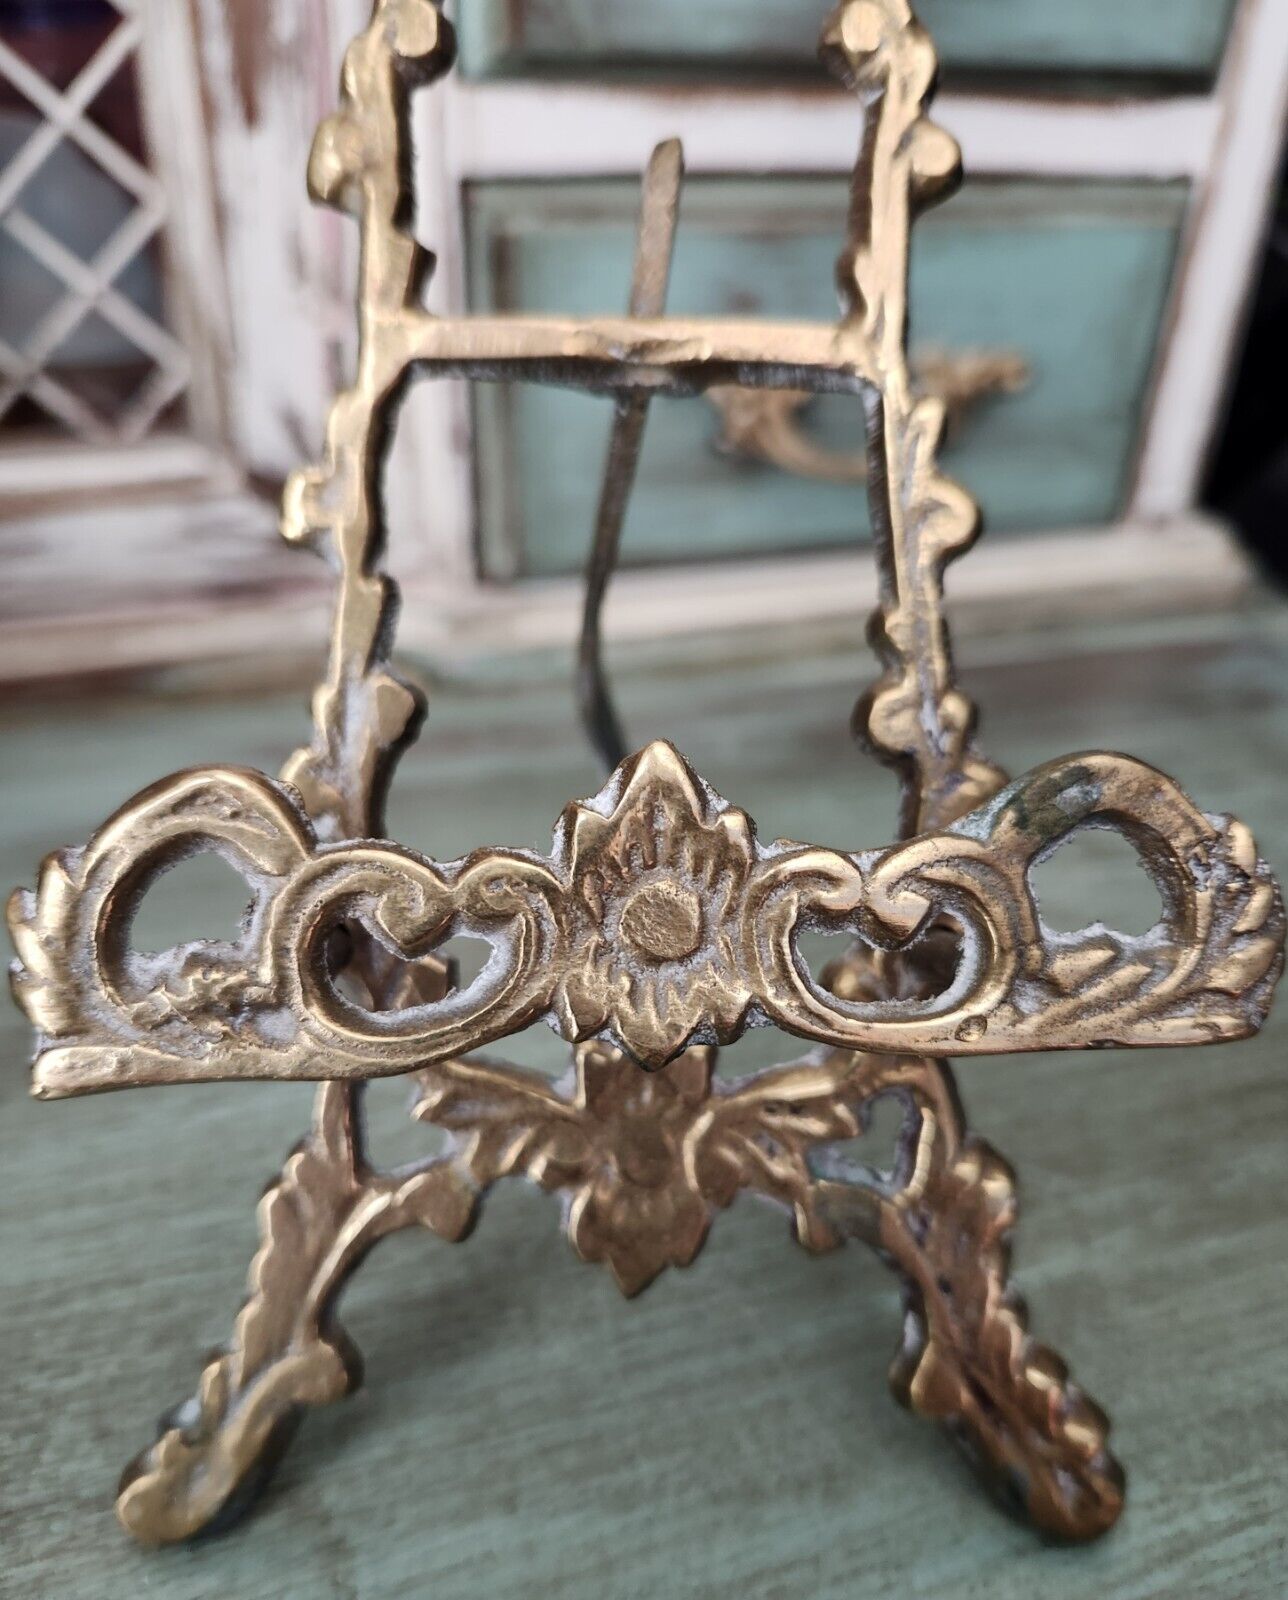 Solid Brass Ornate Small Easel For Business Cards Etc Made In India 8 Inches